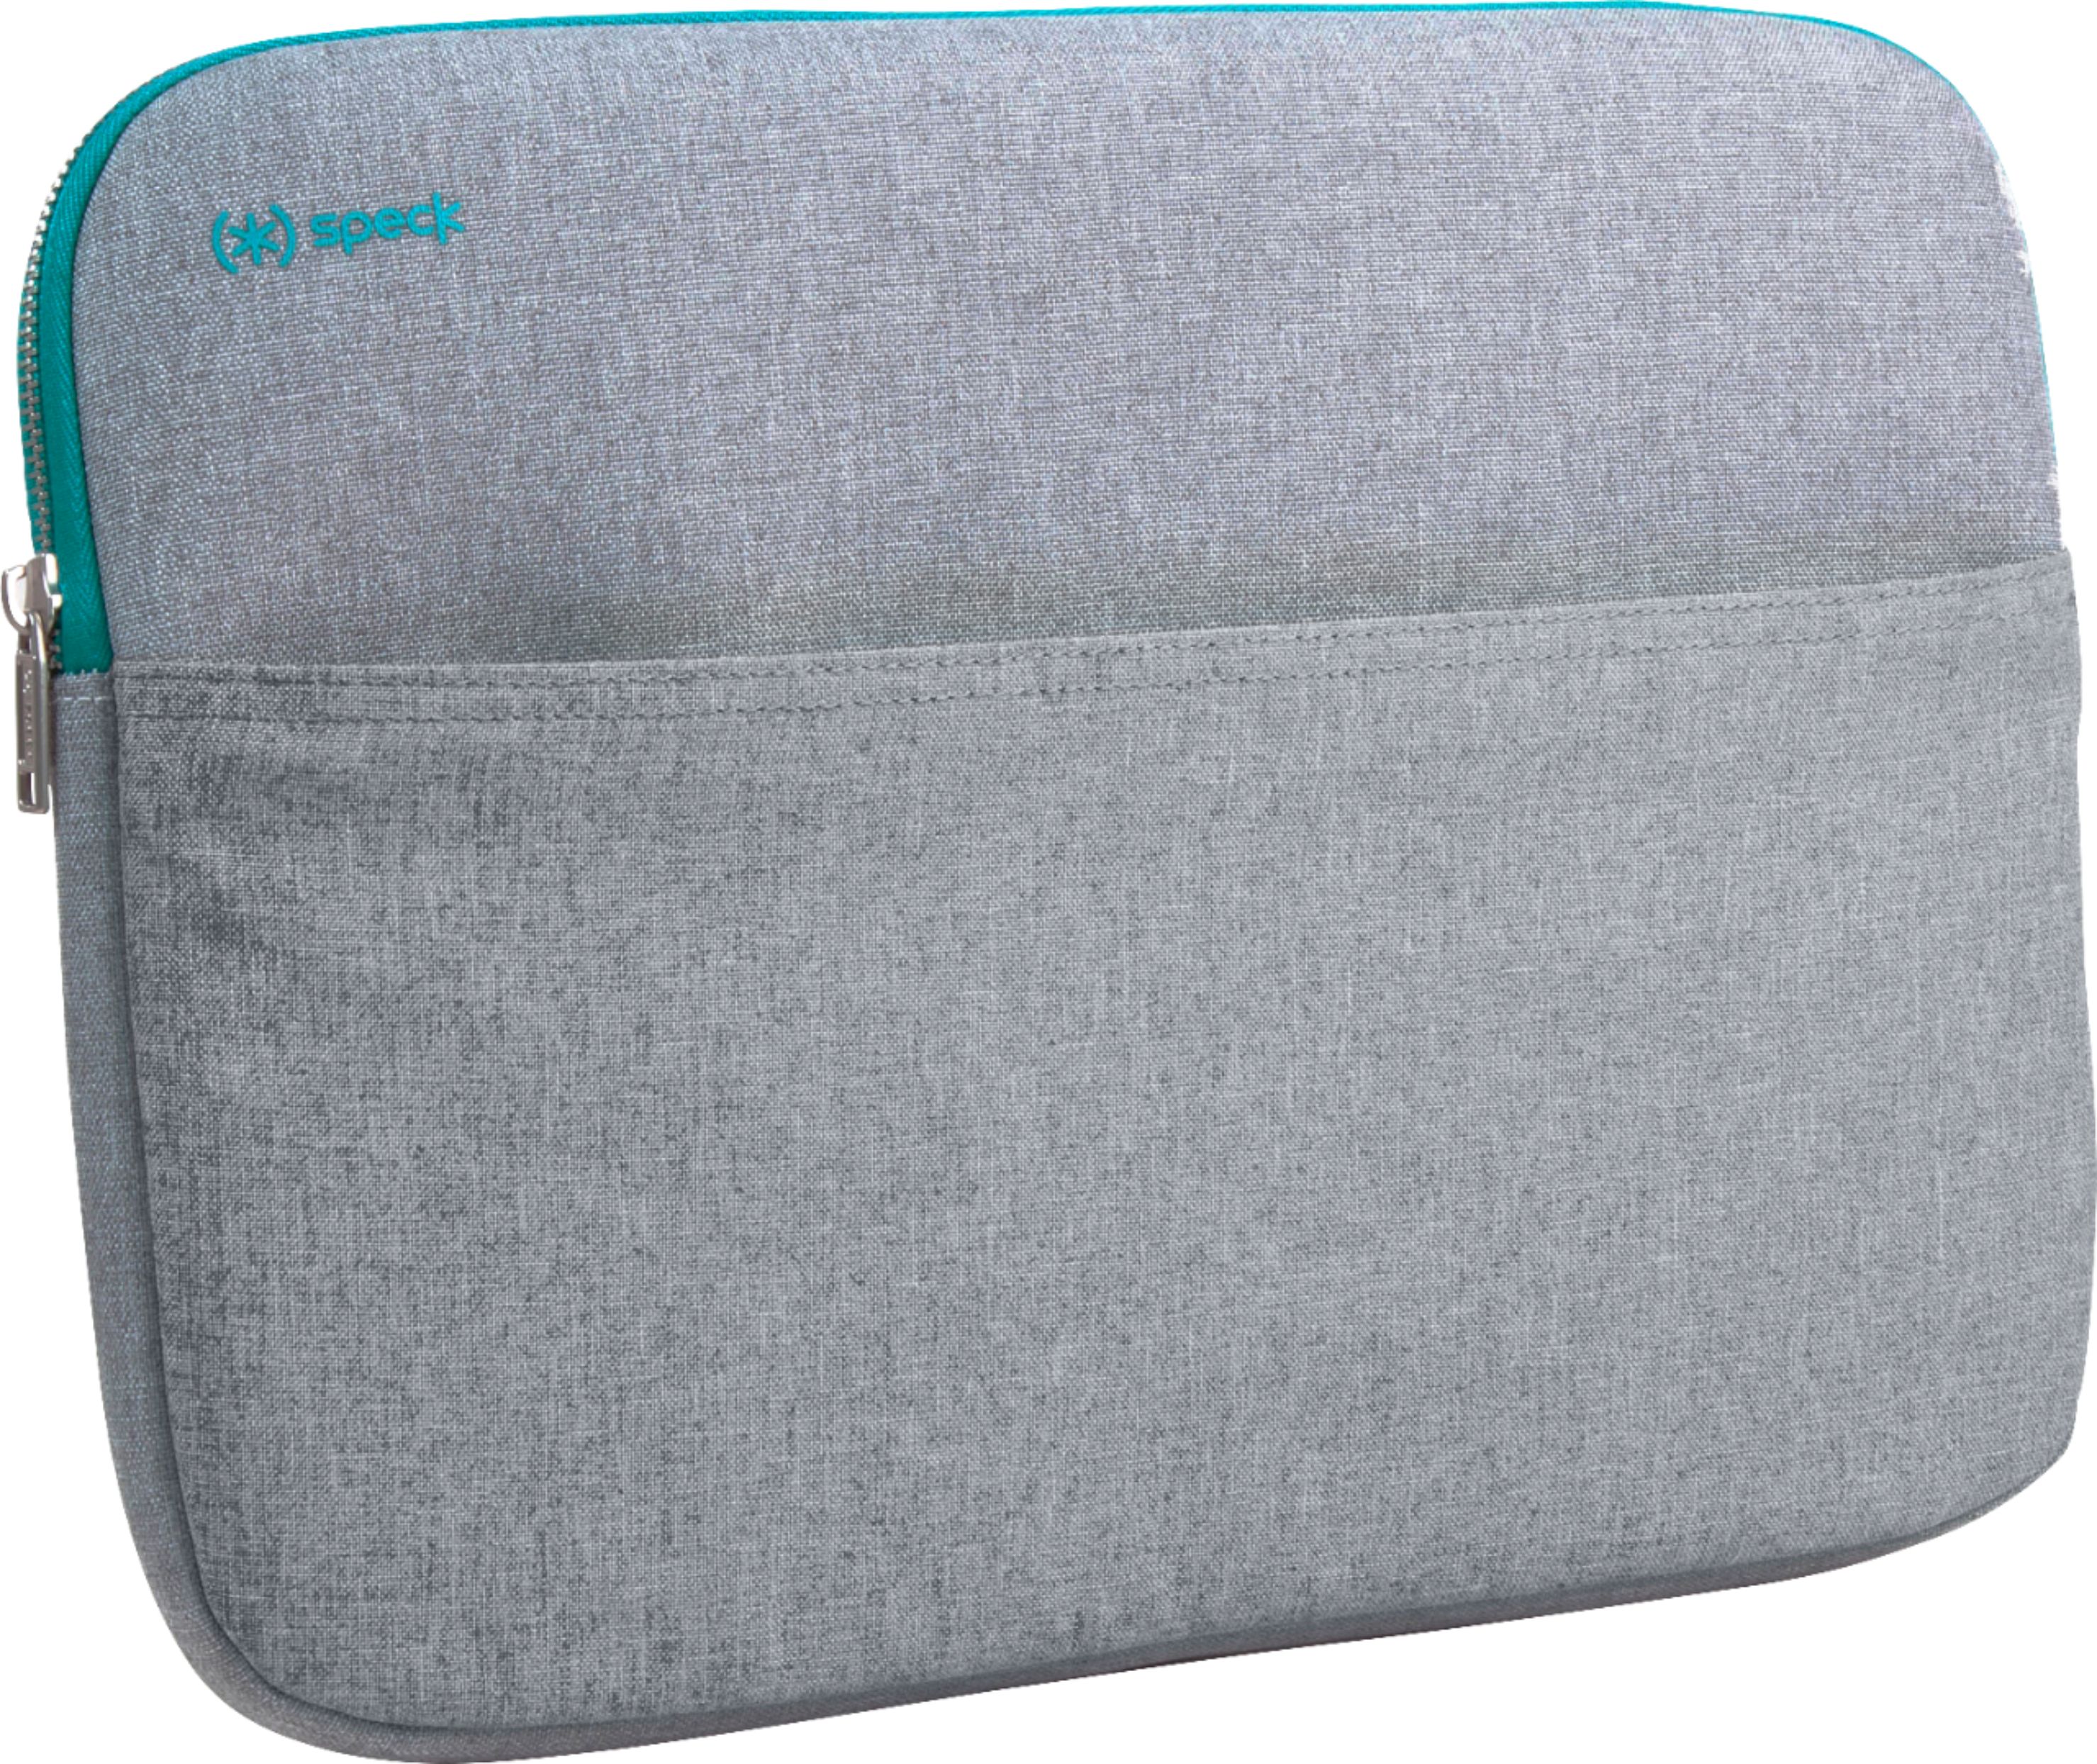 Speck - Transfer Pro Pocket Sleeve for 14" Laptop - Biscay Teal/Sweater Gray